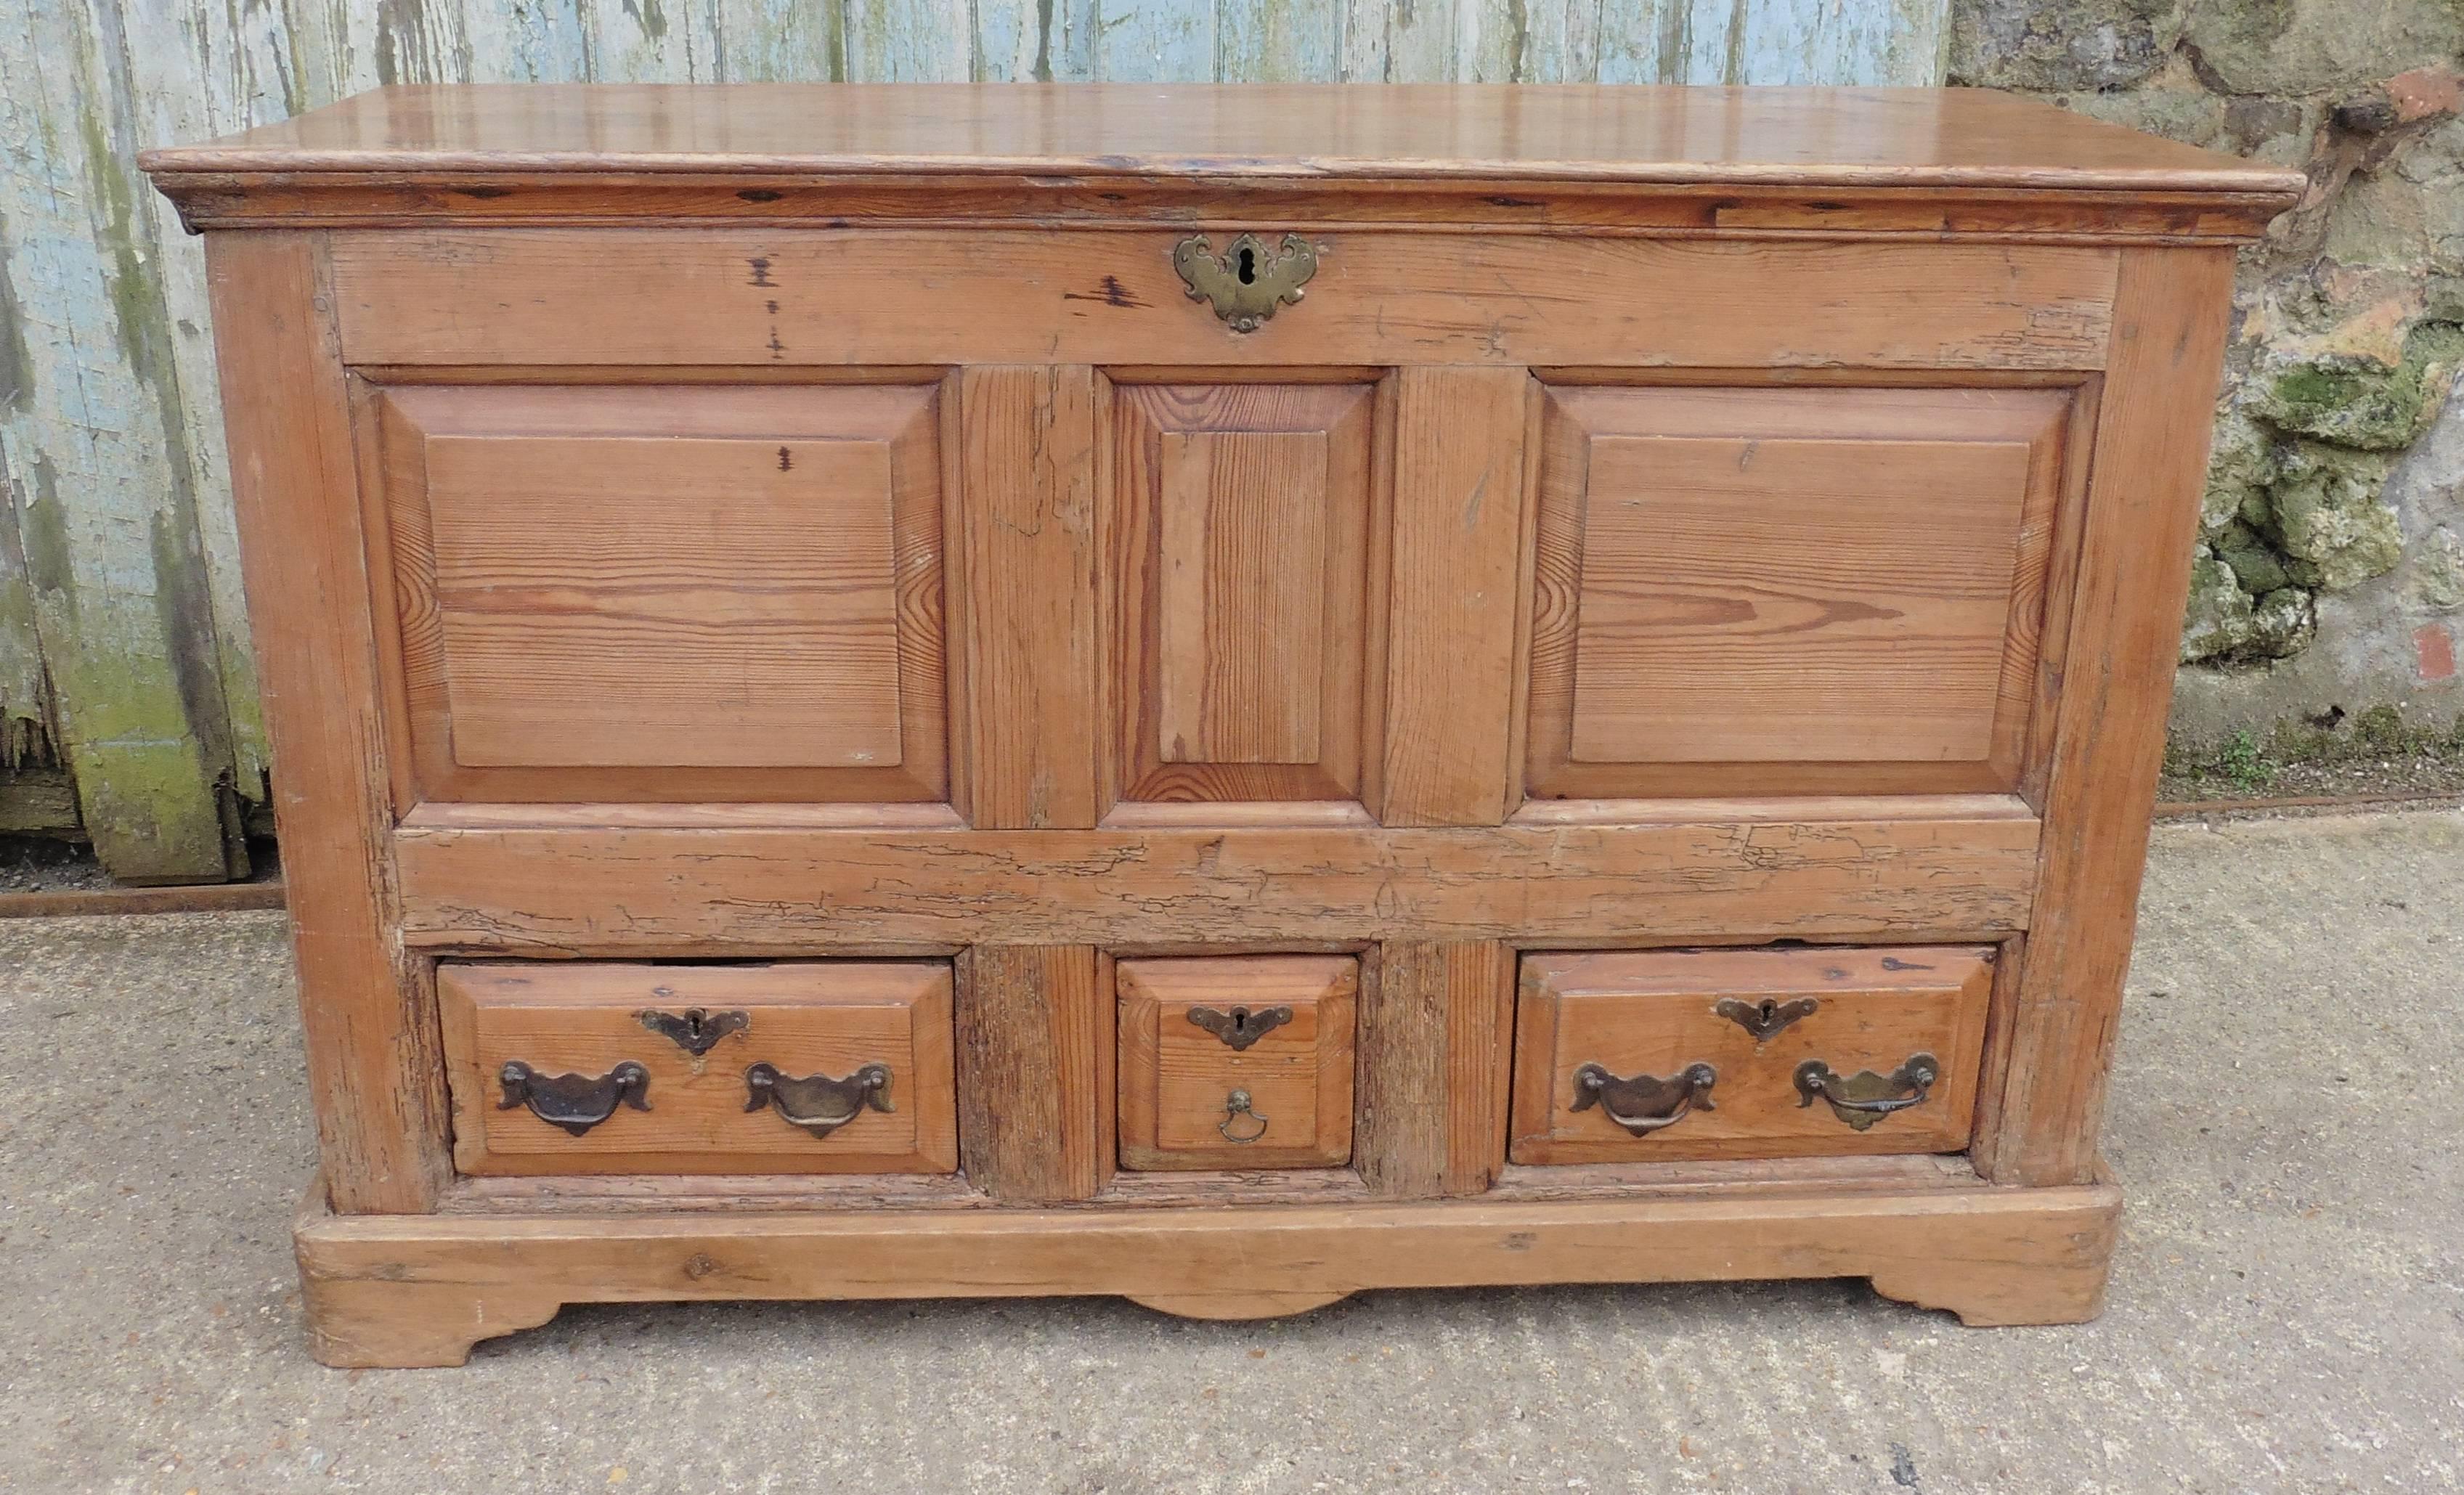 The Mule chest dates from around 1800, it has three moulded panels on the front and another on each side with three drawers at the bottom 

This Georgian Mule chest has a small wooden stay at one side to keep it open when in use
The top of the